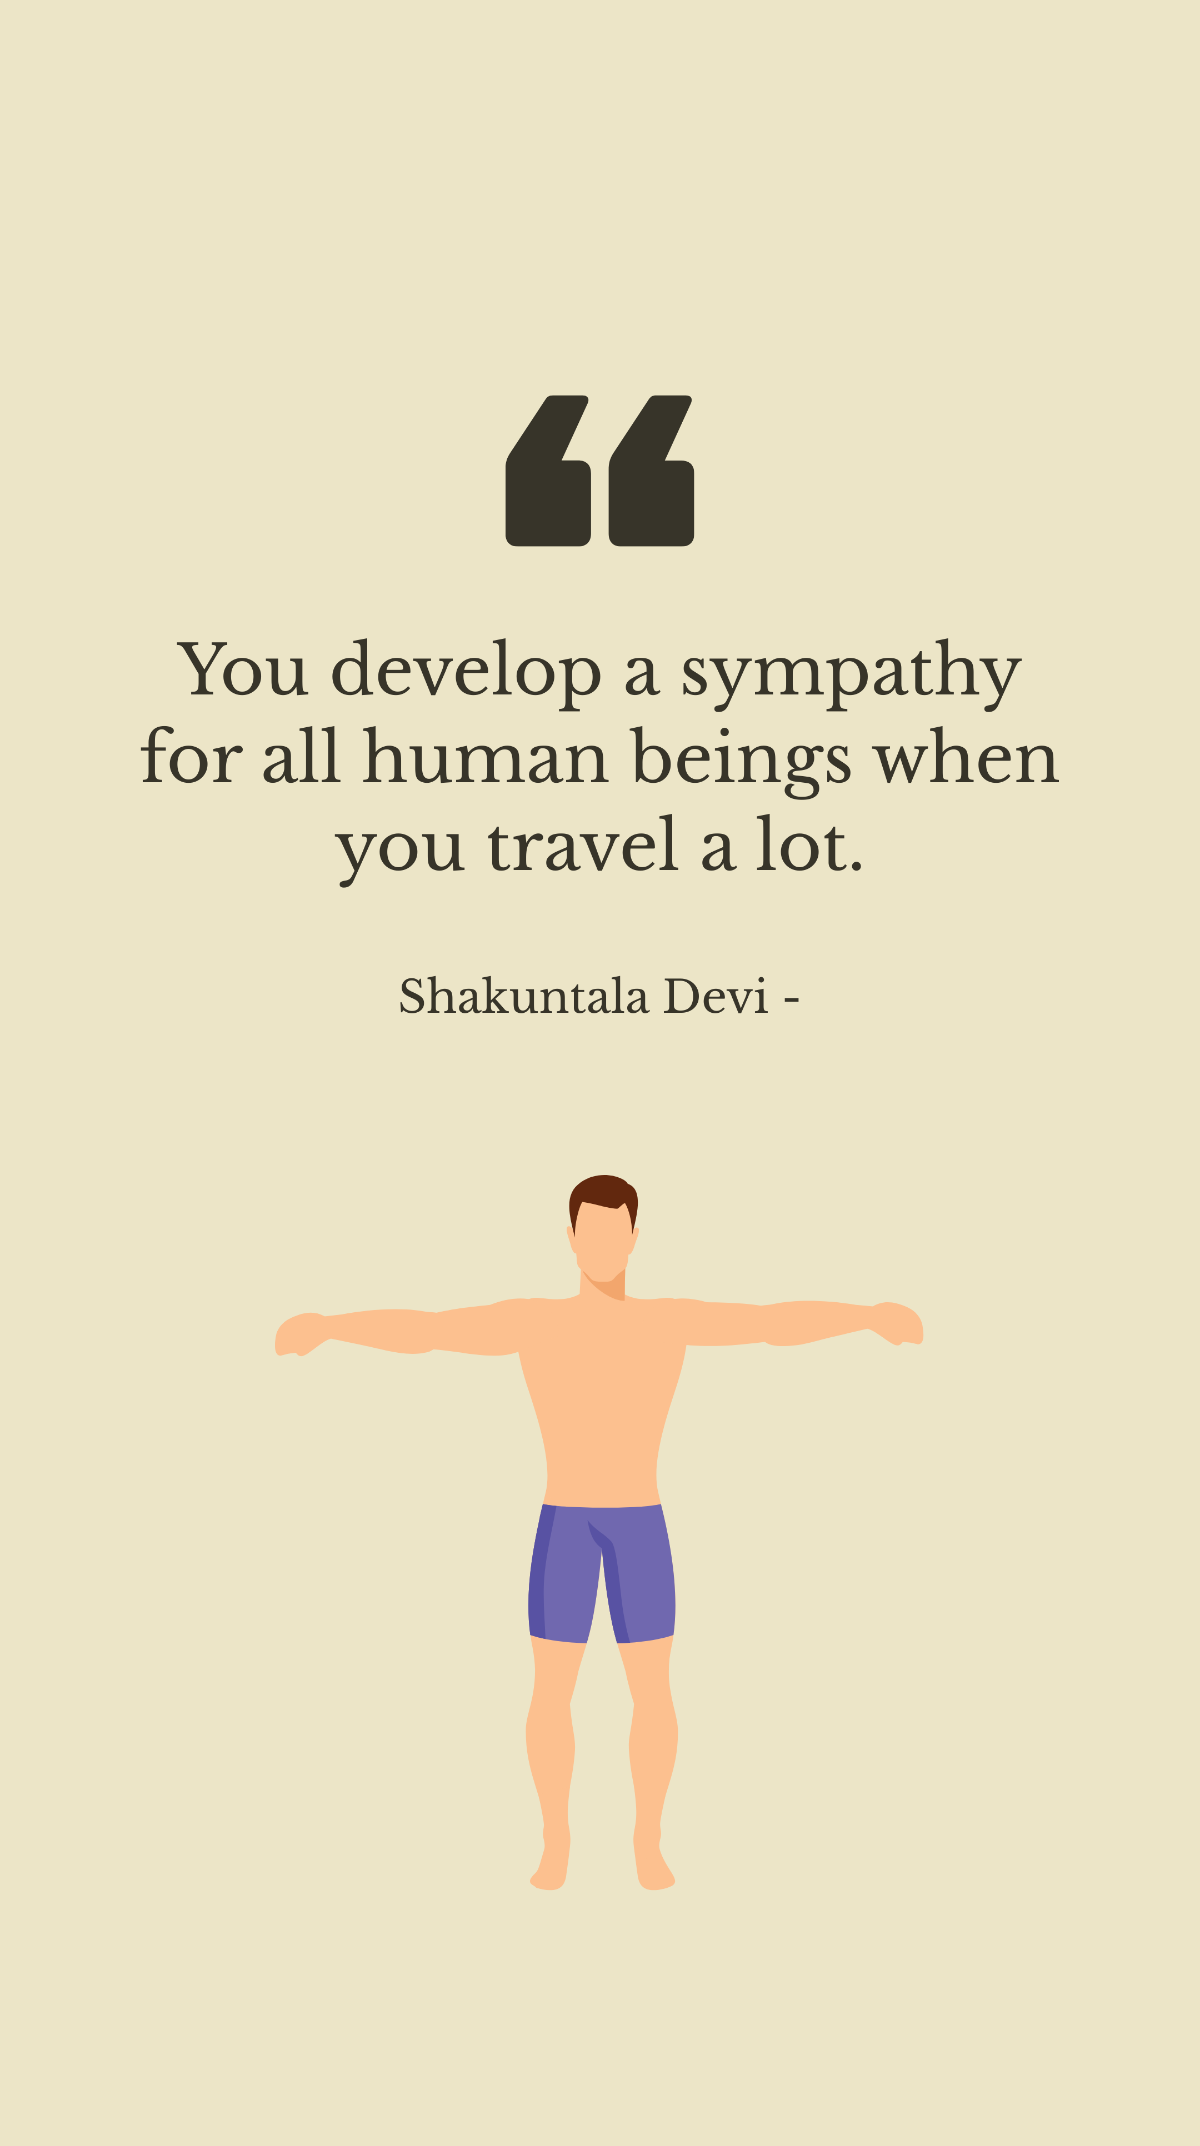 Shakuntala Devi - You develop a sympathy for all human beings when you travel a lot.